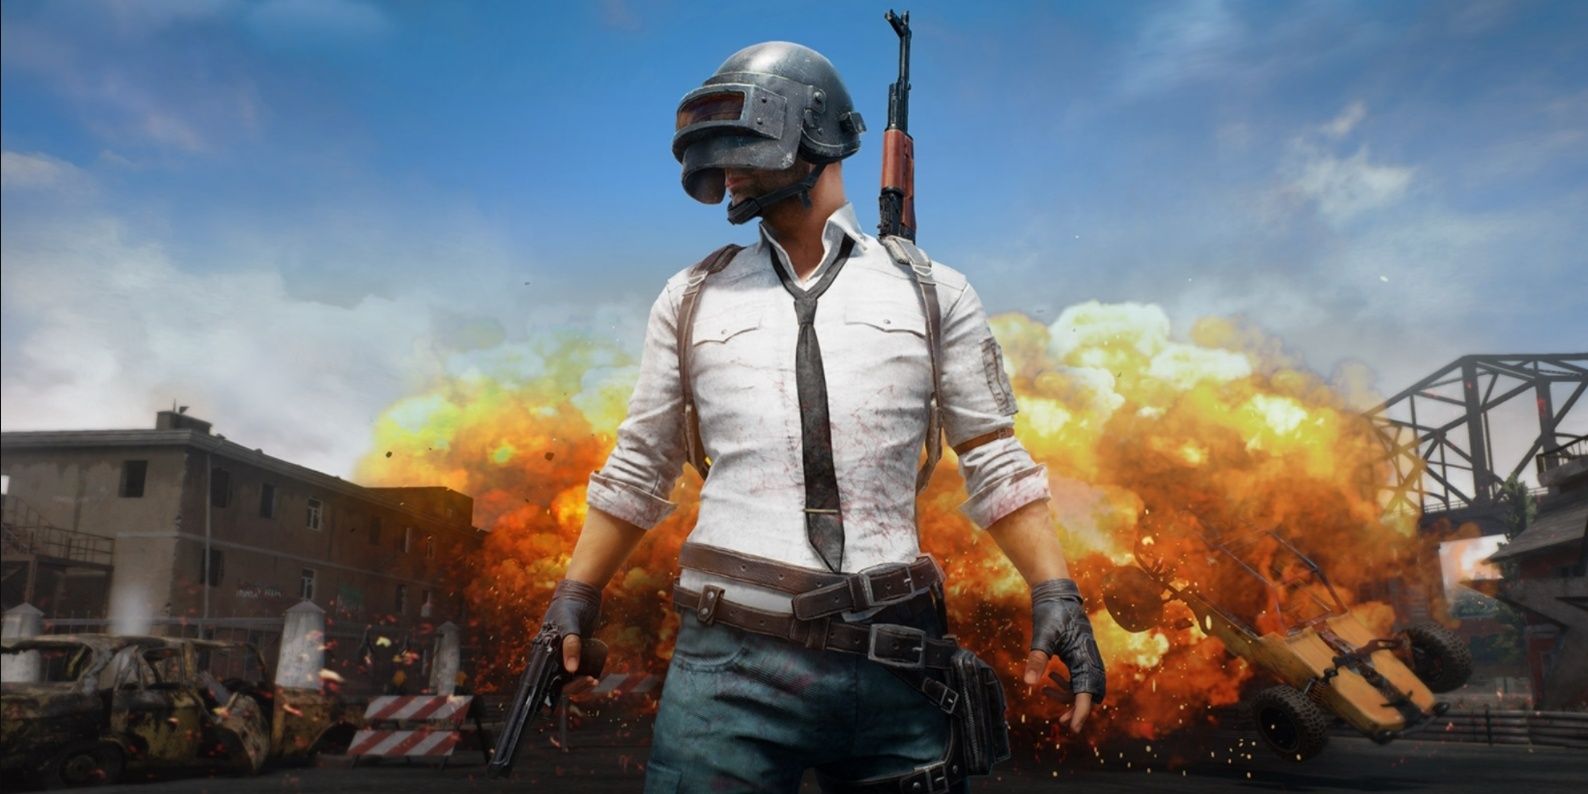 The promotional image of PlayerUnknown's Battlegrounds